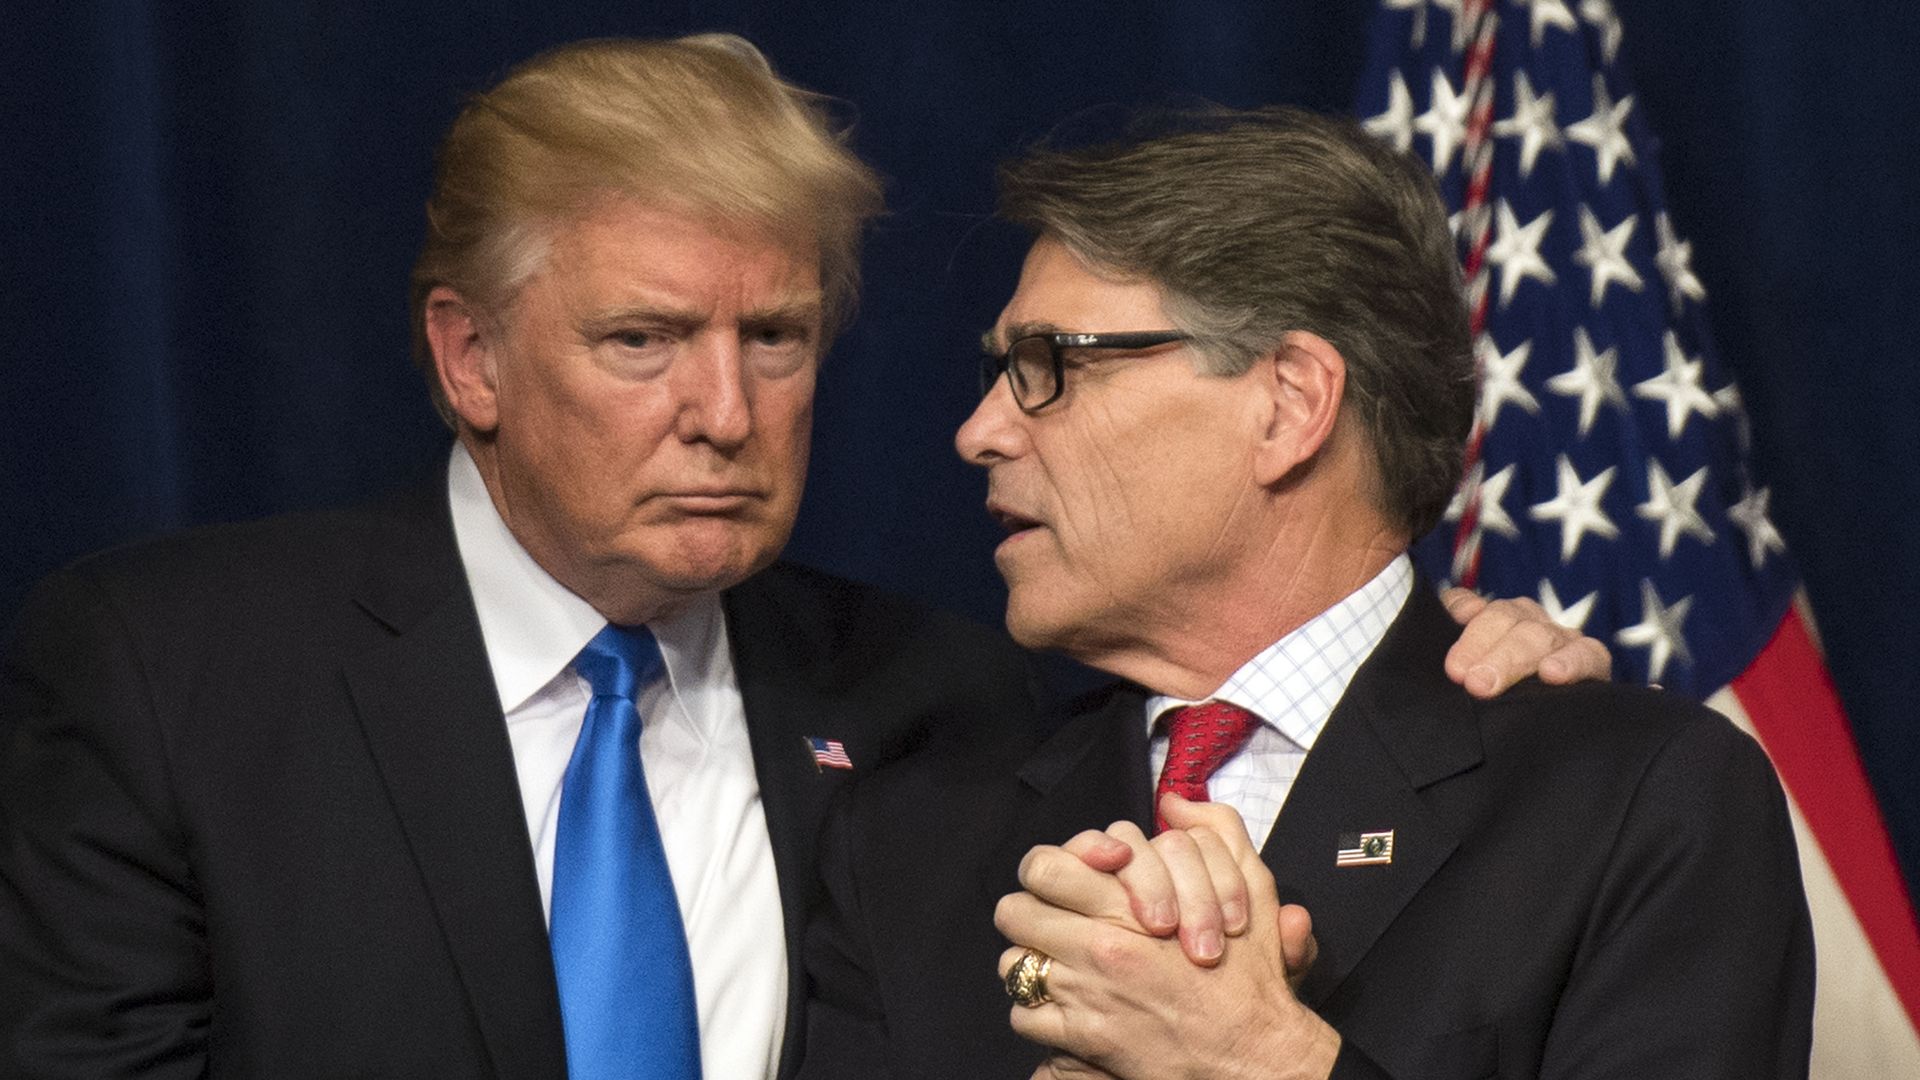 U.S. President Donald Trump (L) embraces Energy Secretary Rick Perry after Trump delivered remarks